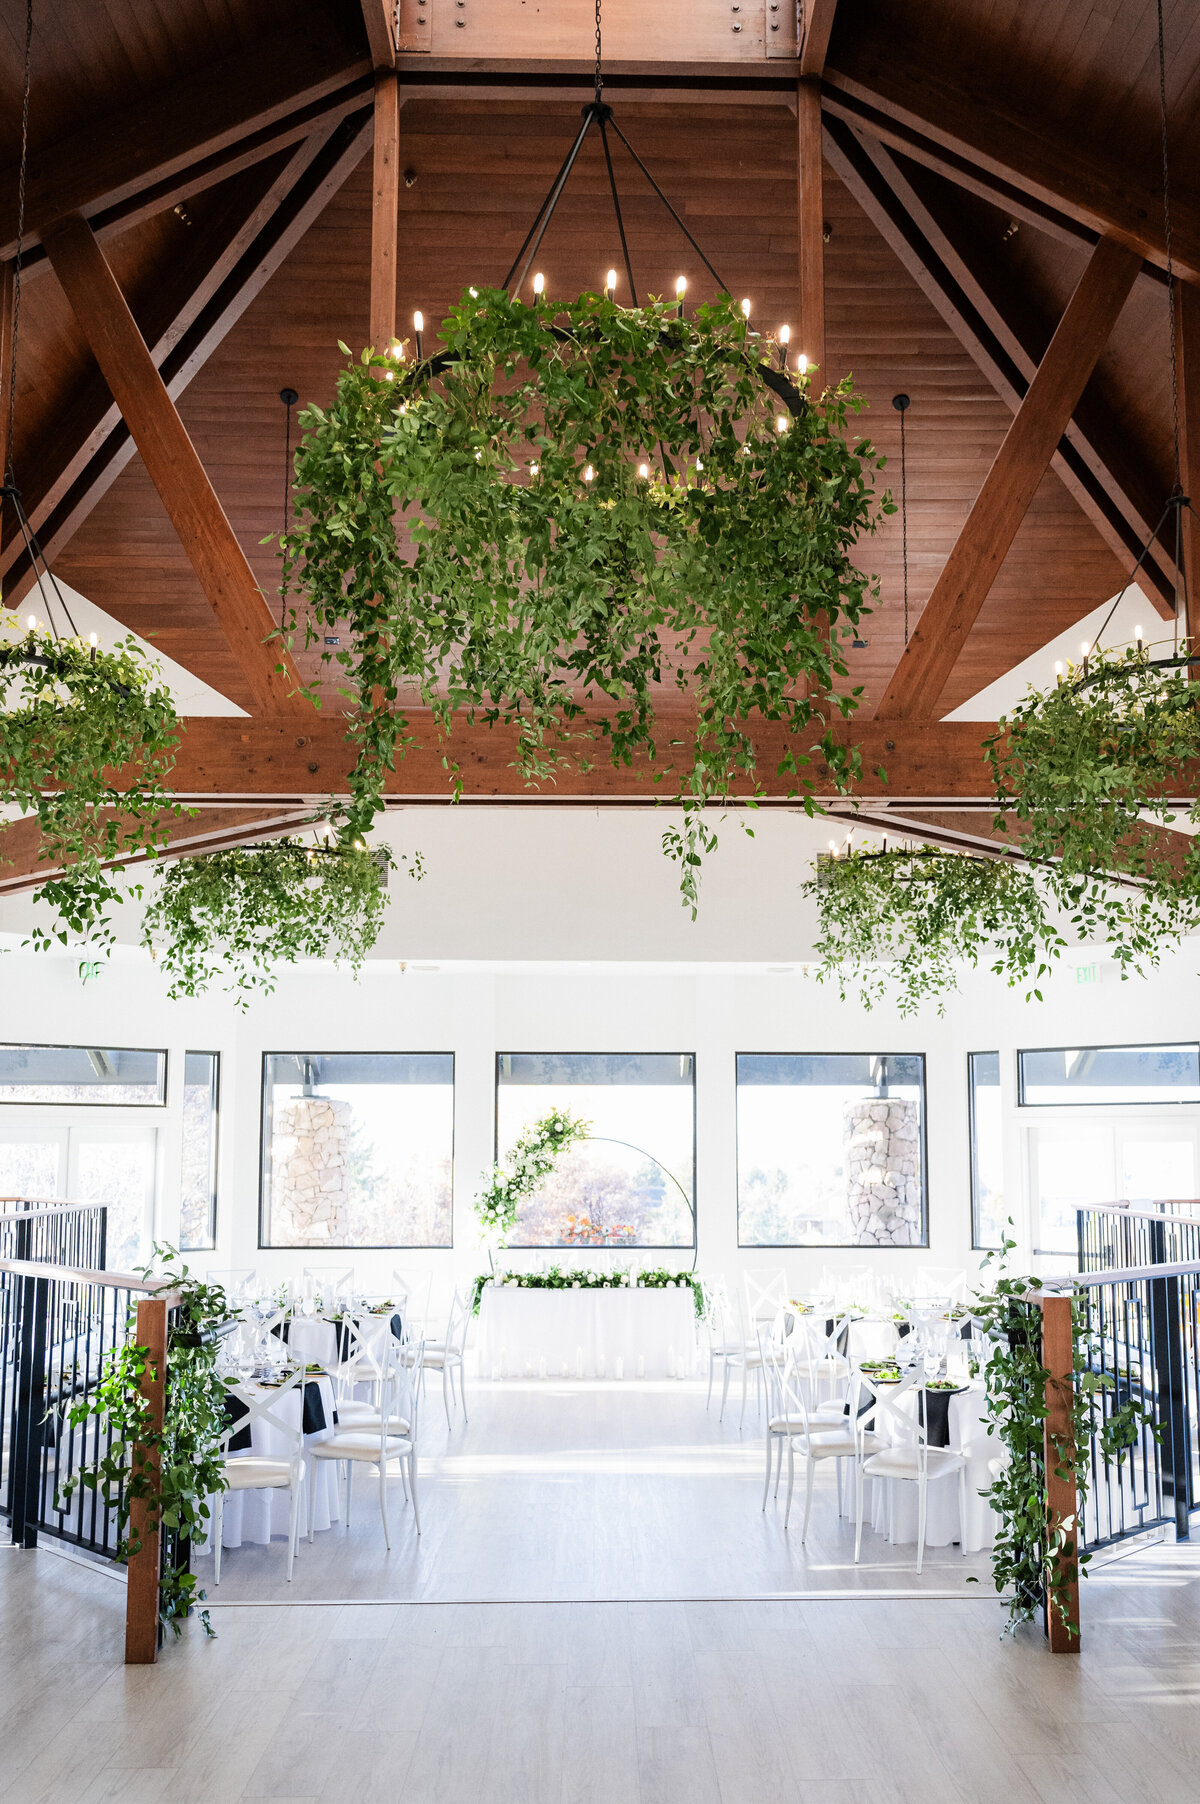 A bright, grand room at The Oaks at Plum Creek has greenery hanging from the chandeliers and is set for a wedding ceremony.